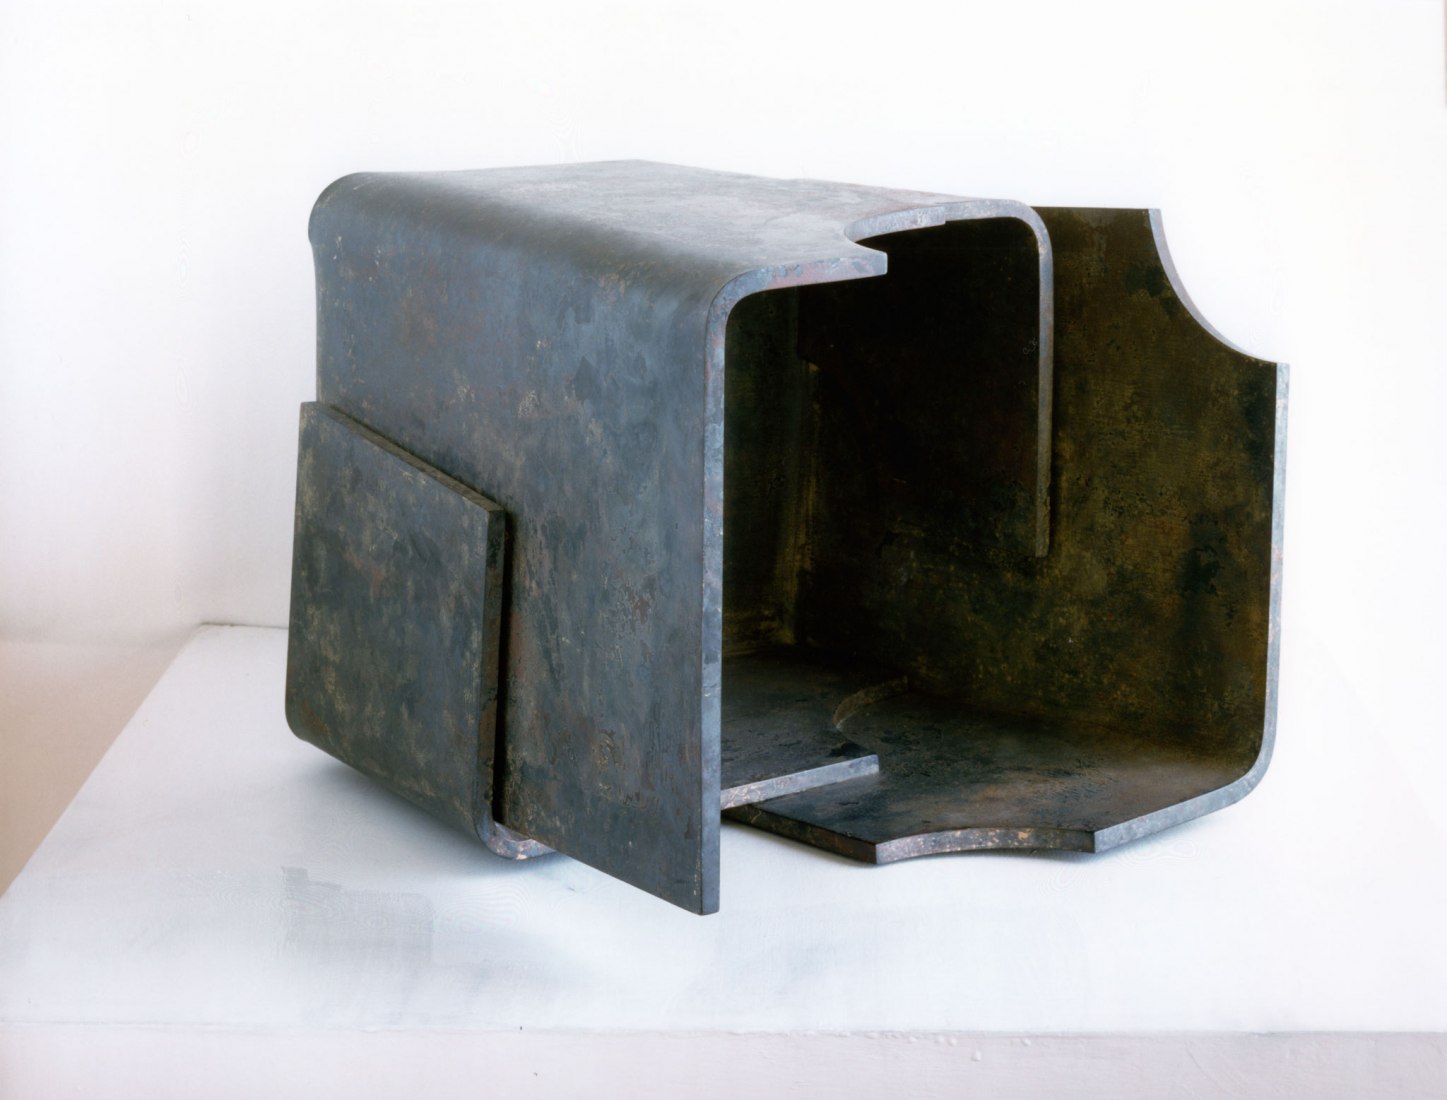 Locmariaquer VI, Eduardo Chillida. Steel. Signed 31 x 44 x 40 cm. Made in 1989. Provenance Private collection, Switzerland Exhibitions New York, Sidney Janis Gallery, Chillida in New York, November 1989 - January 1990, cat. do not. 17 La Joya, Tasende Gallery, Chillida, March - May 1997, p. 39, rep. Image courtesy of Guillermo de Osma Gallery